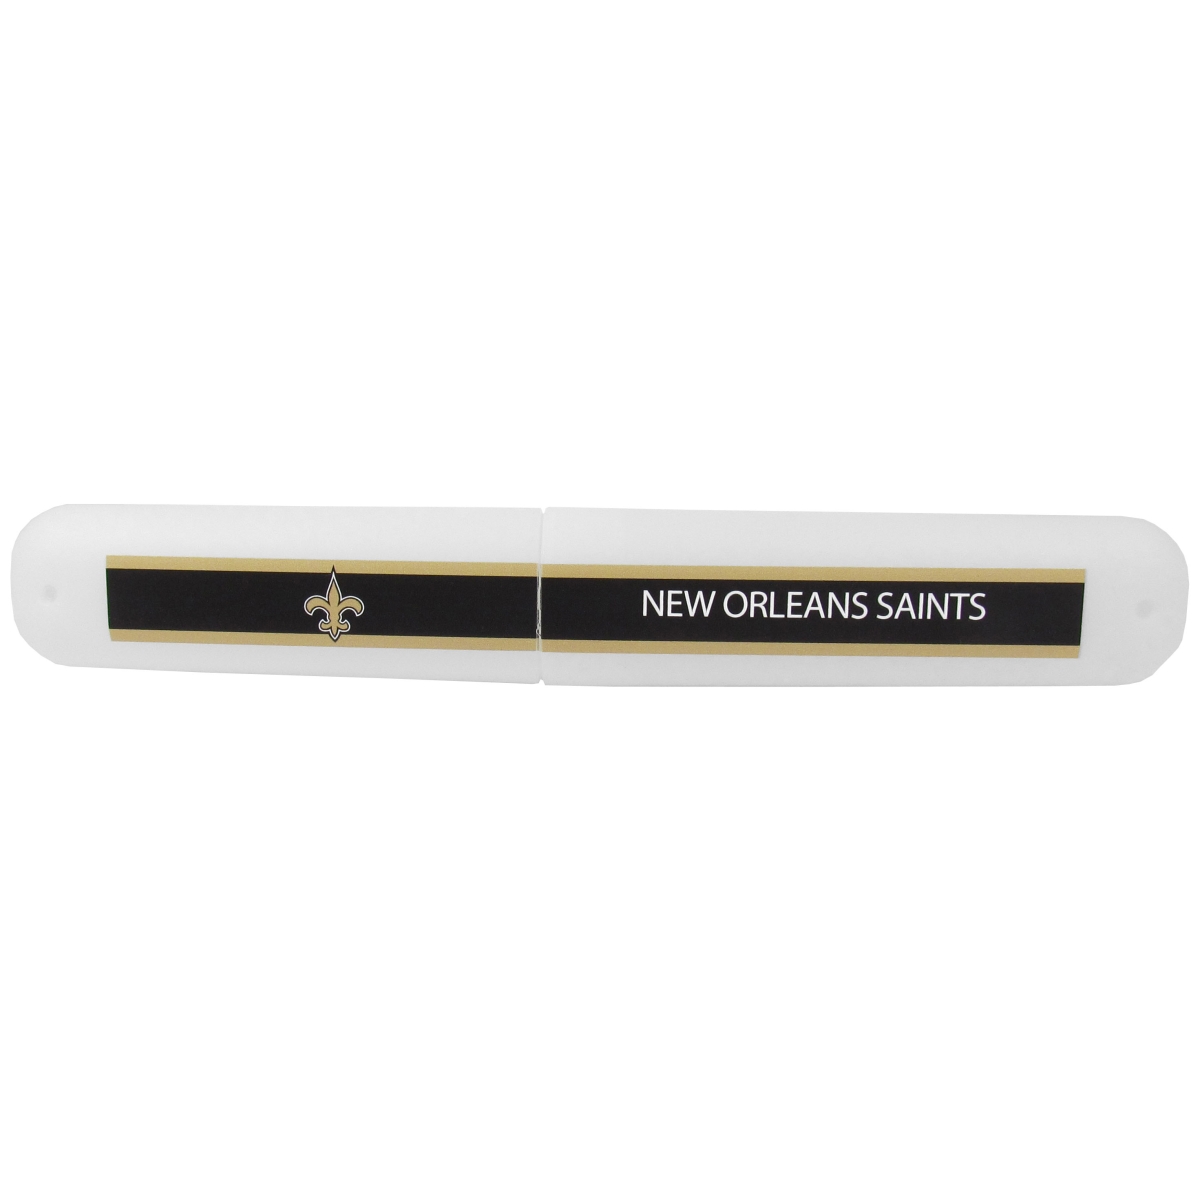 Picture of Siskiyou FTBC150 Unisex NFL New Orleans Saints Travel Toothbrush Case - One Size